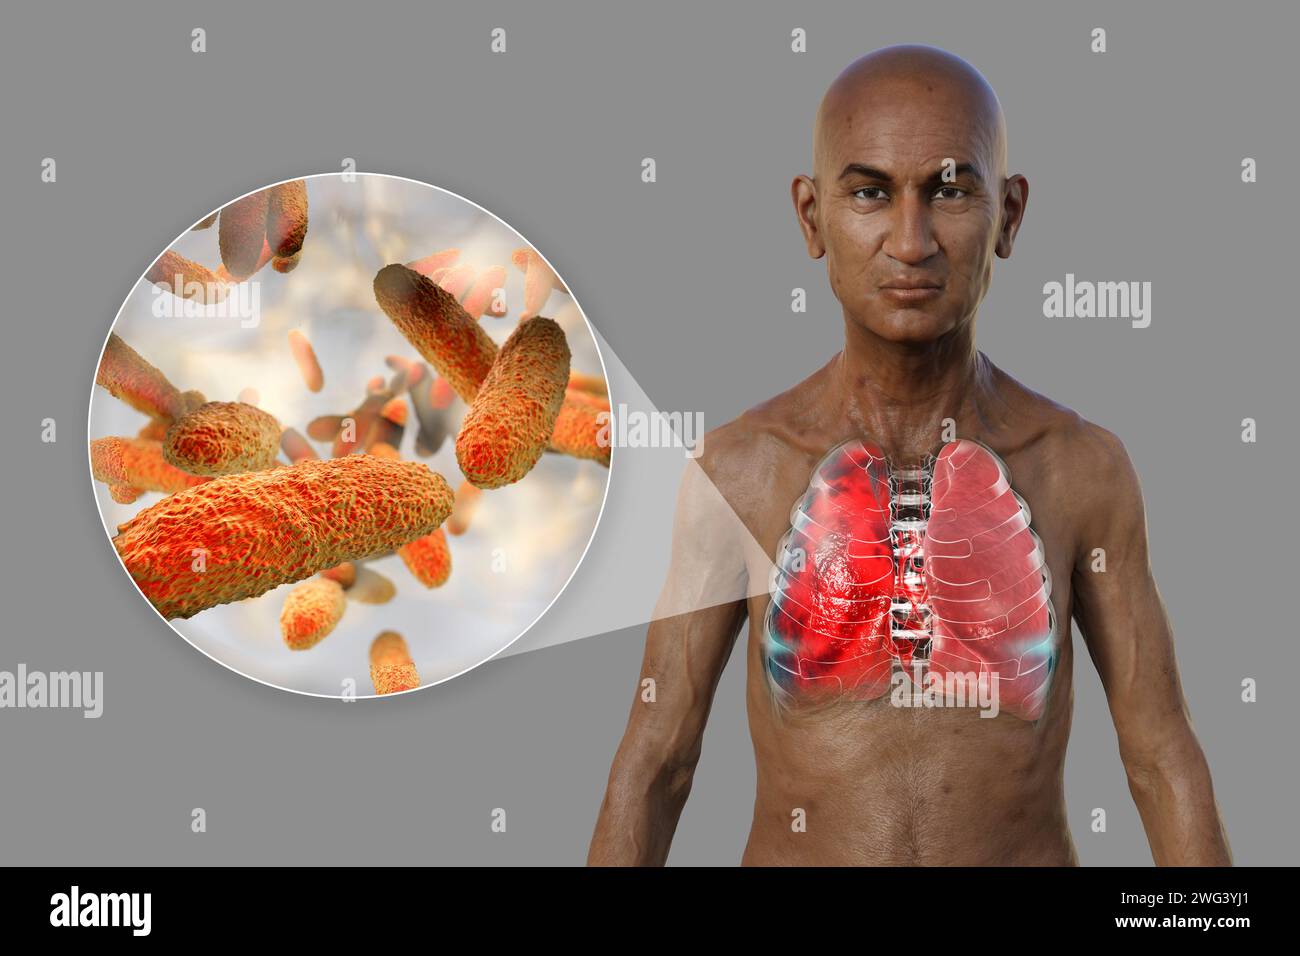 Man with lungs affected by pneumonia, illustration Stock Photo